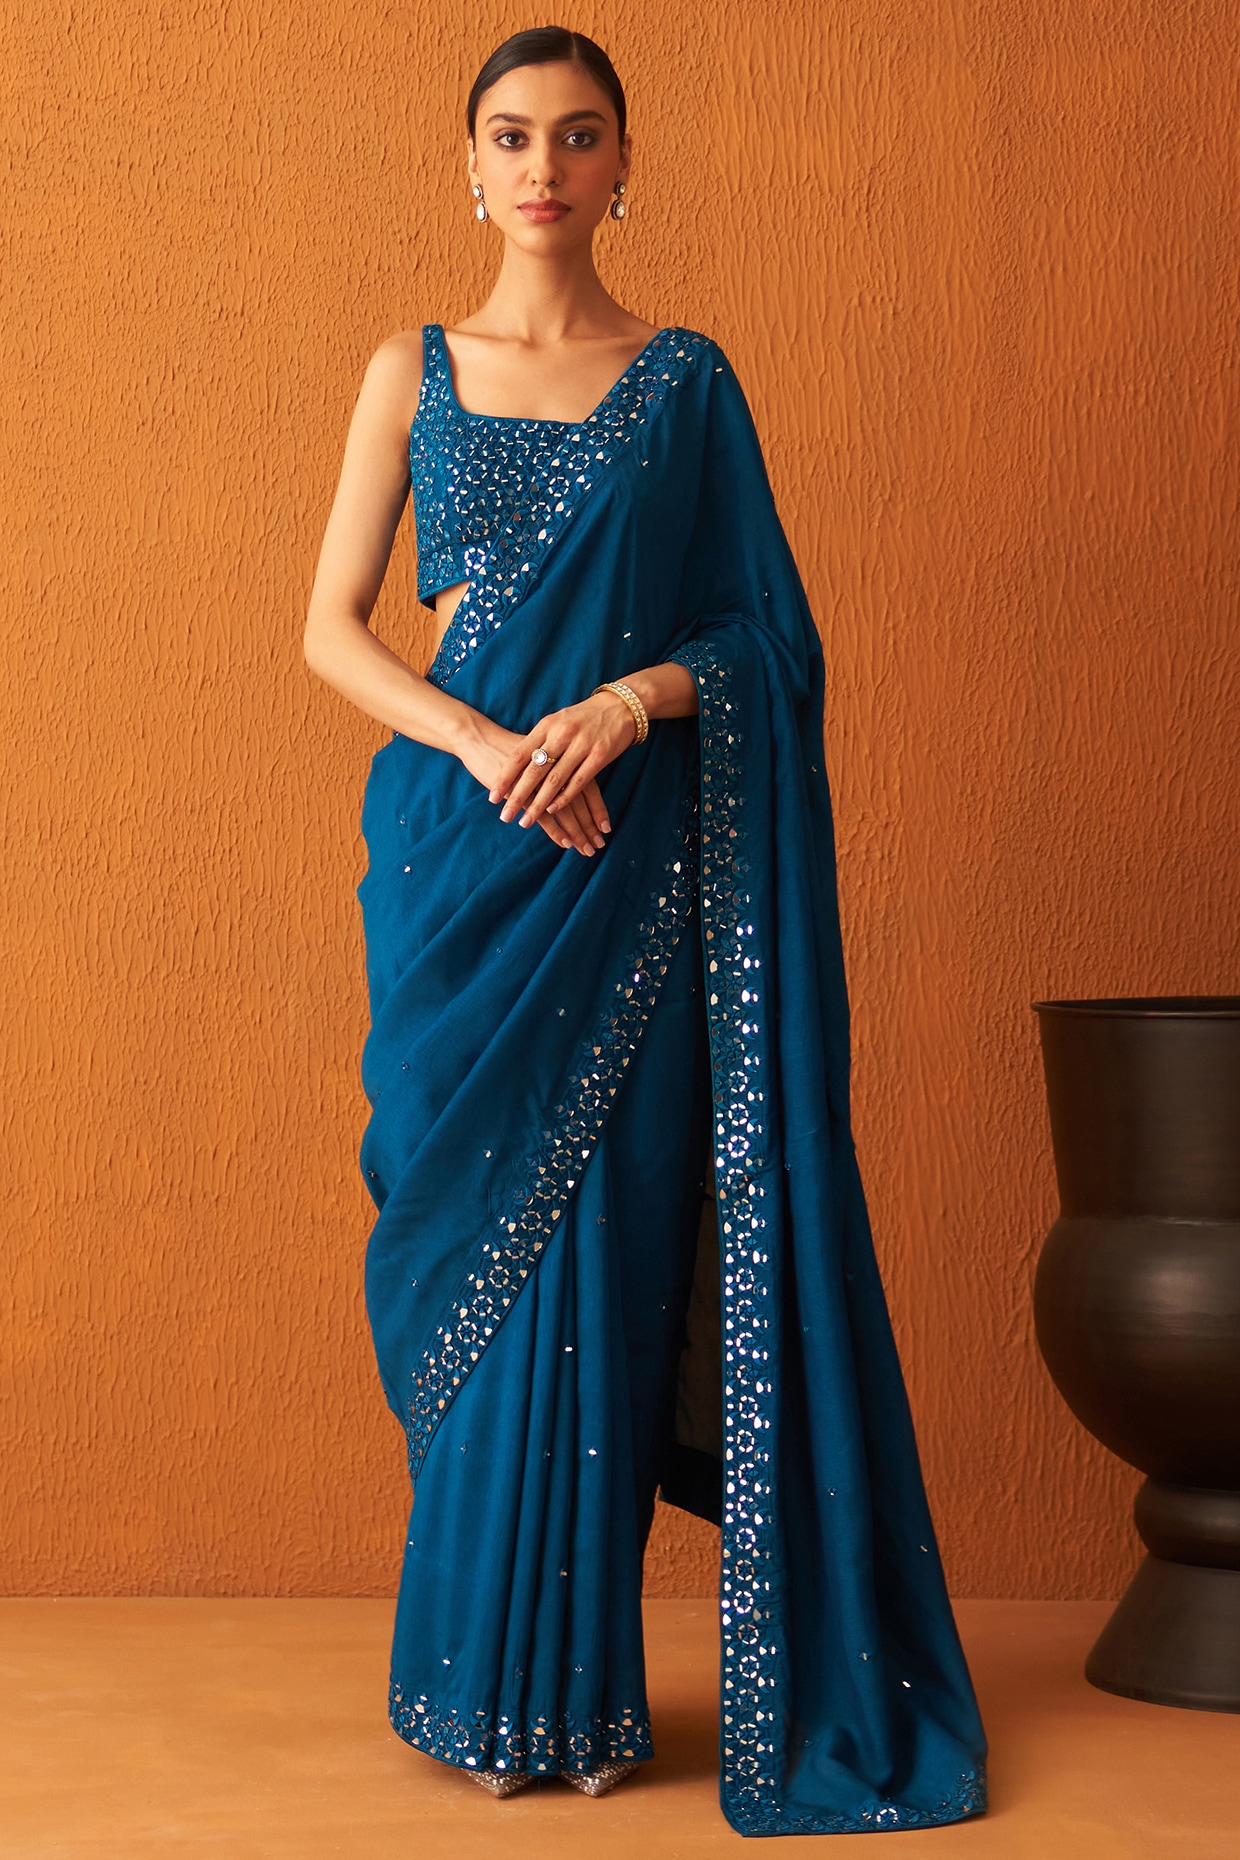 Traditional waer handloom Silk embroidery work Saree With Contrast Blouse &  Embellished Border- peacock blue colour - Aapnam